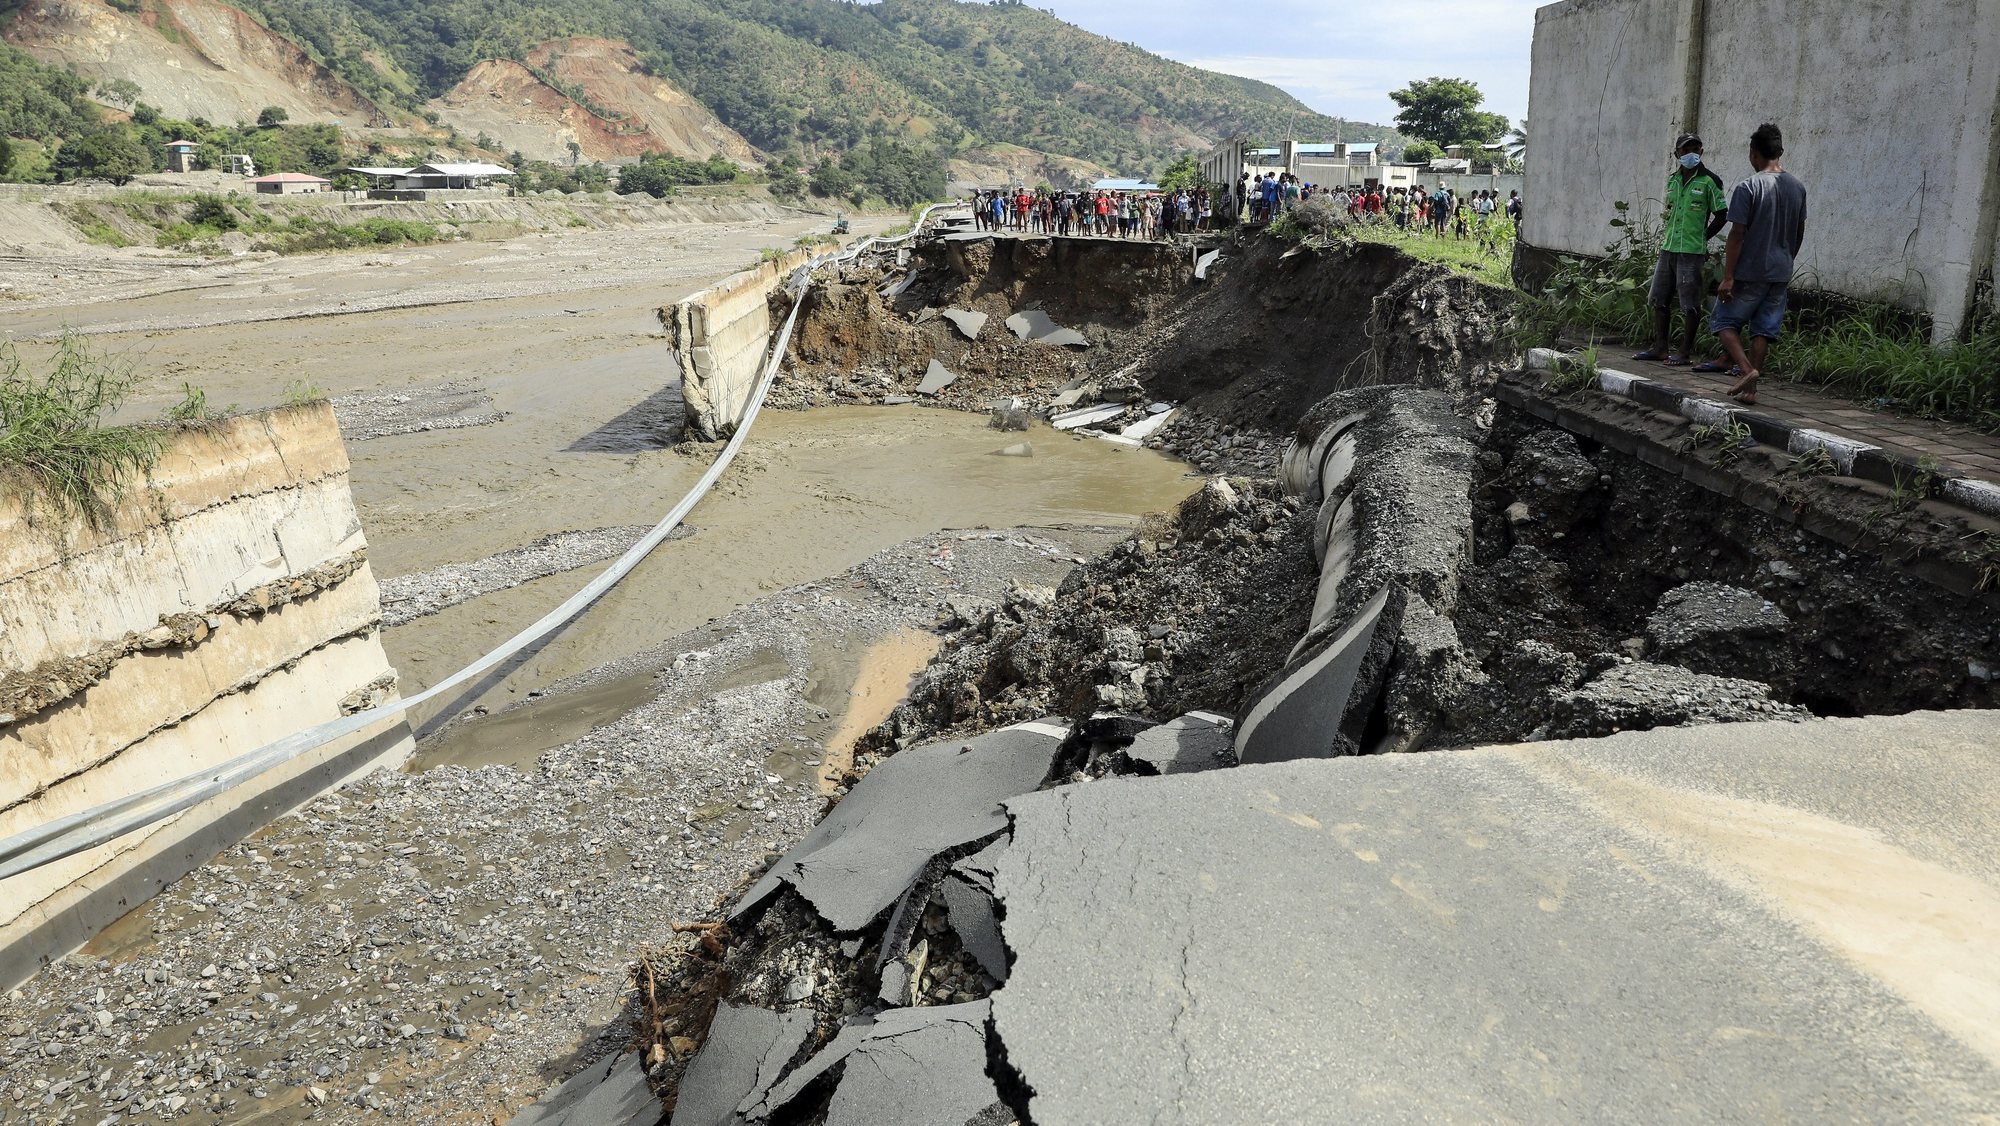 epa09117913 People gather near a damaged road in the aftermath of floods in Dili, East Timor, also known as Timor Leste, 06 April 2021. More than 150 people have been killed in eastern part of Indonesia and neighbouring East Timor, after floods and Seroja tropical cyclone hit the region, leaving dozens of people missing and thousands homeless.  EPA/ANTONIO DASIPARU